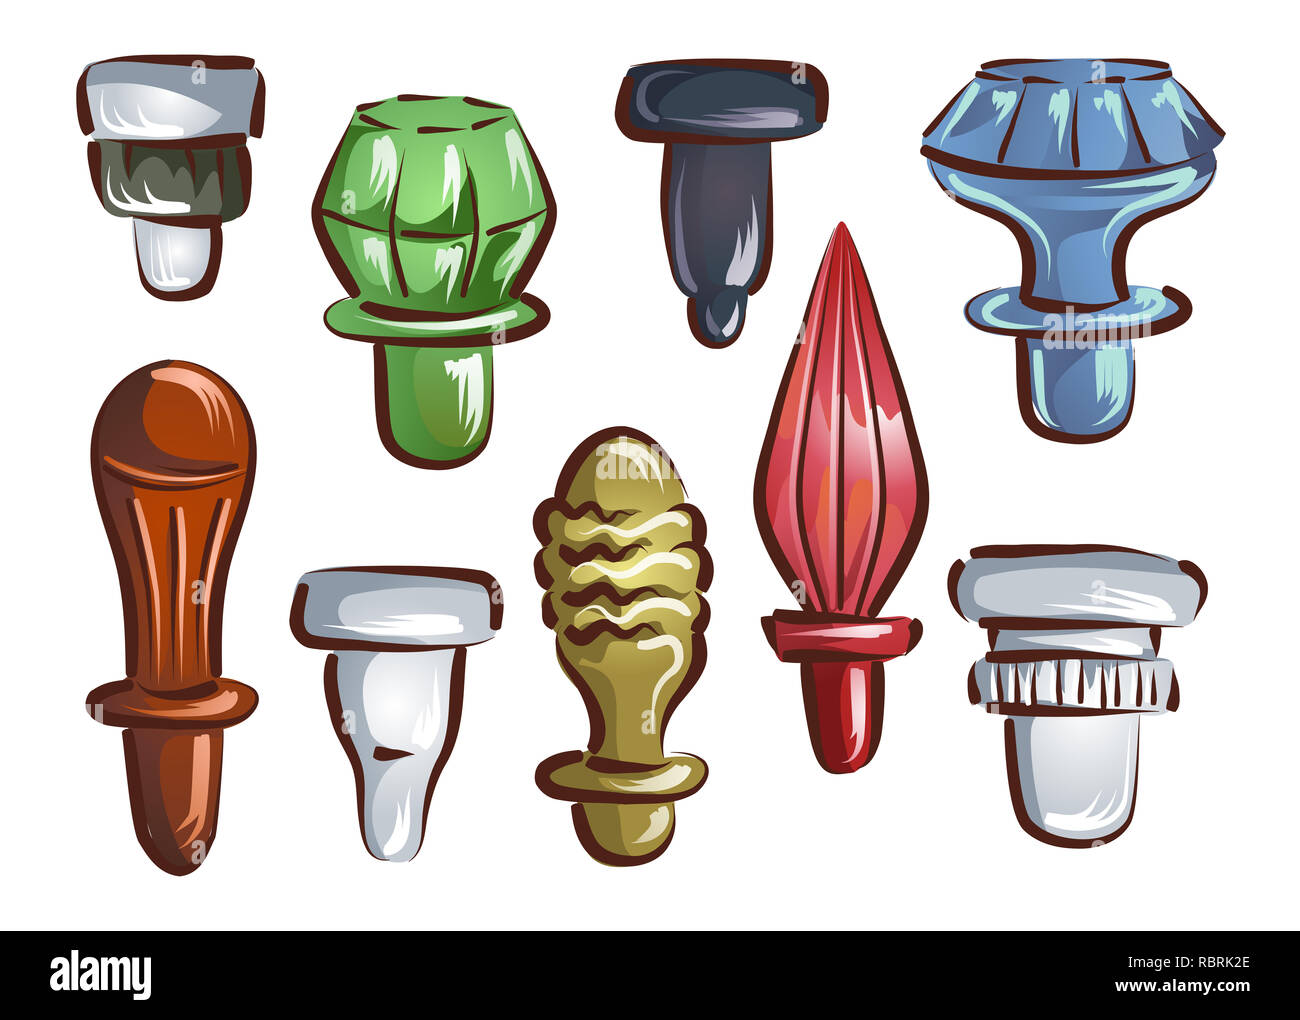 Illustration of Different Glass Stoppers in Different Shapes and Colors for Bottle Collection Stock Photo